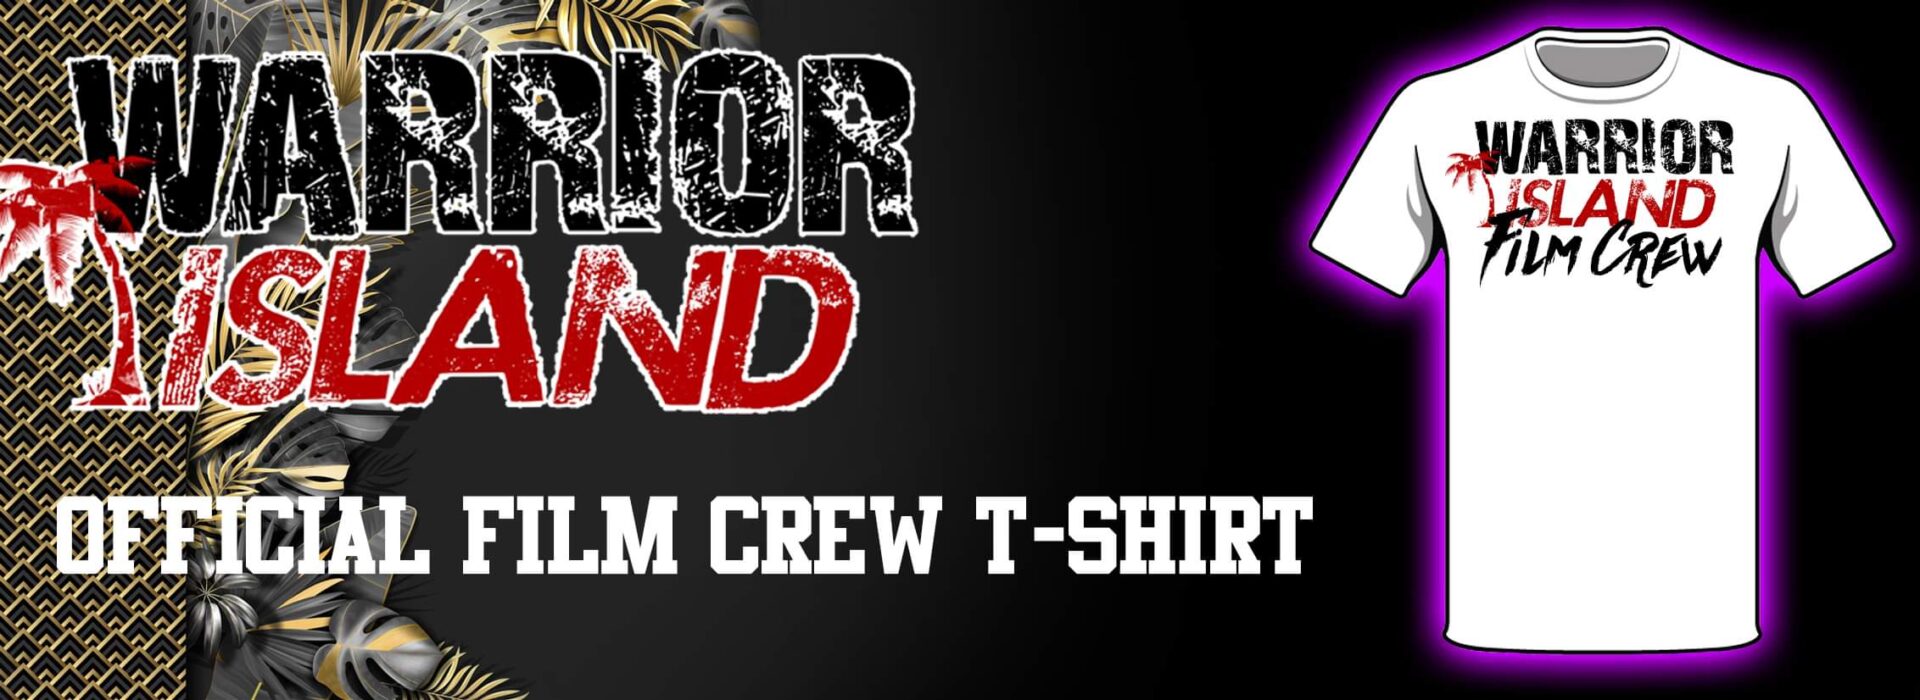 Warrior island poster with its official film crew tshirt image